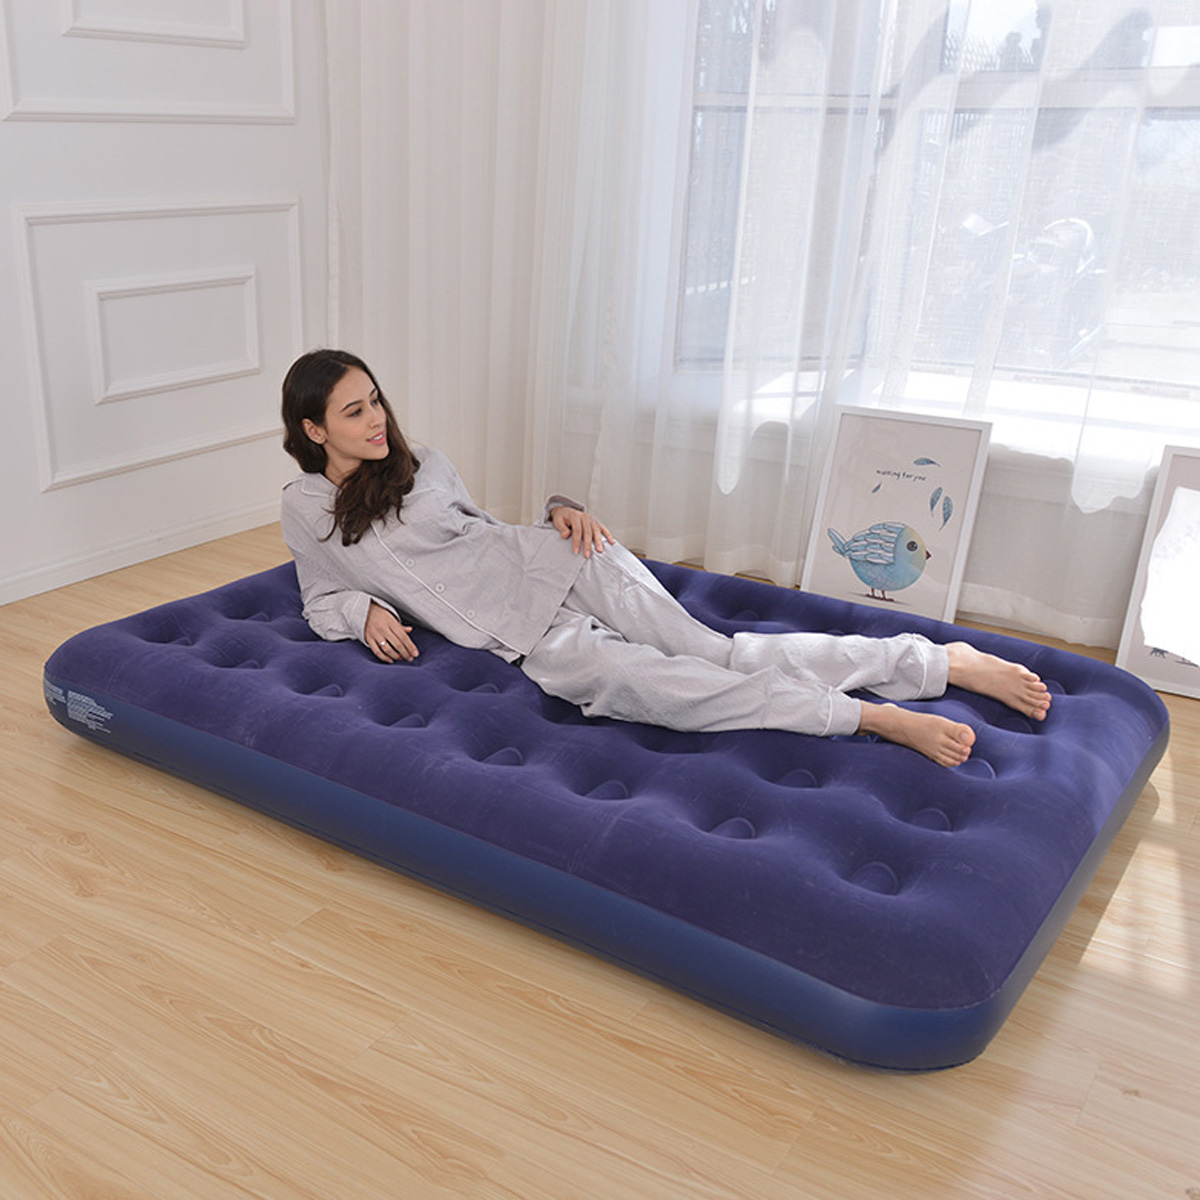 PVC-Inflatable-Bed-Inflatable-Mattress-Air-Mattress-Bed-Single-Double-Wide-Soft-Mattress-Comfortable-1842780-10